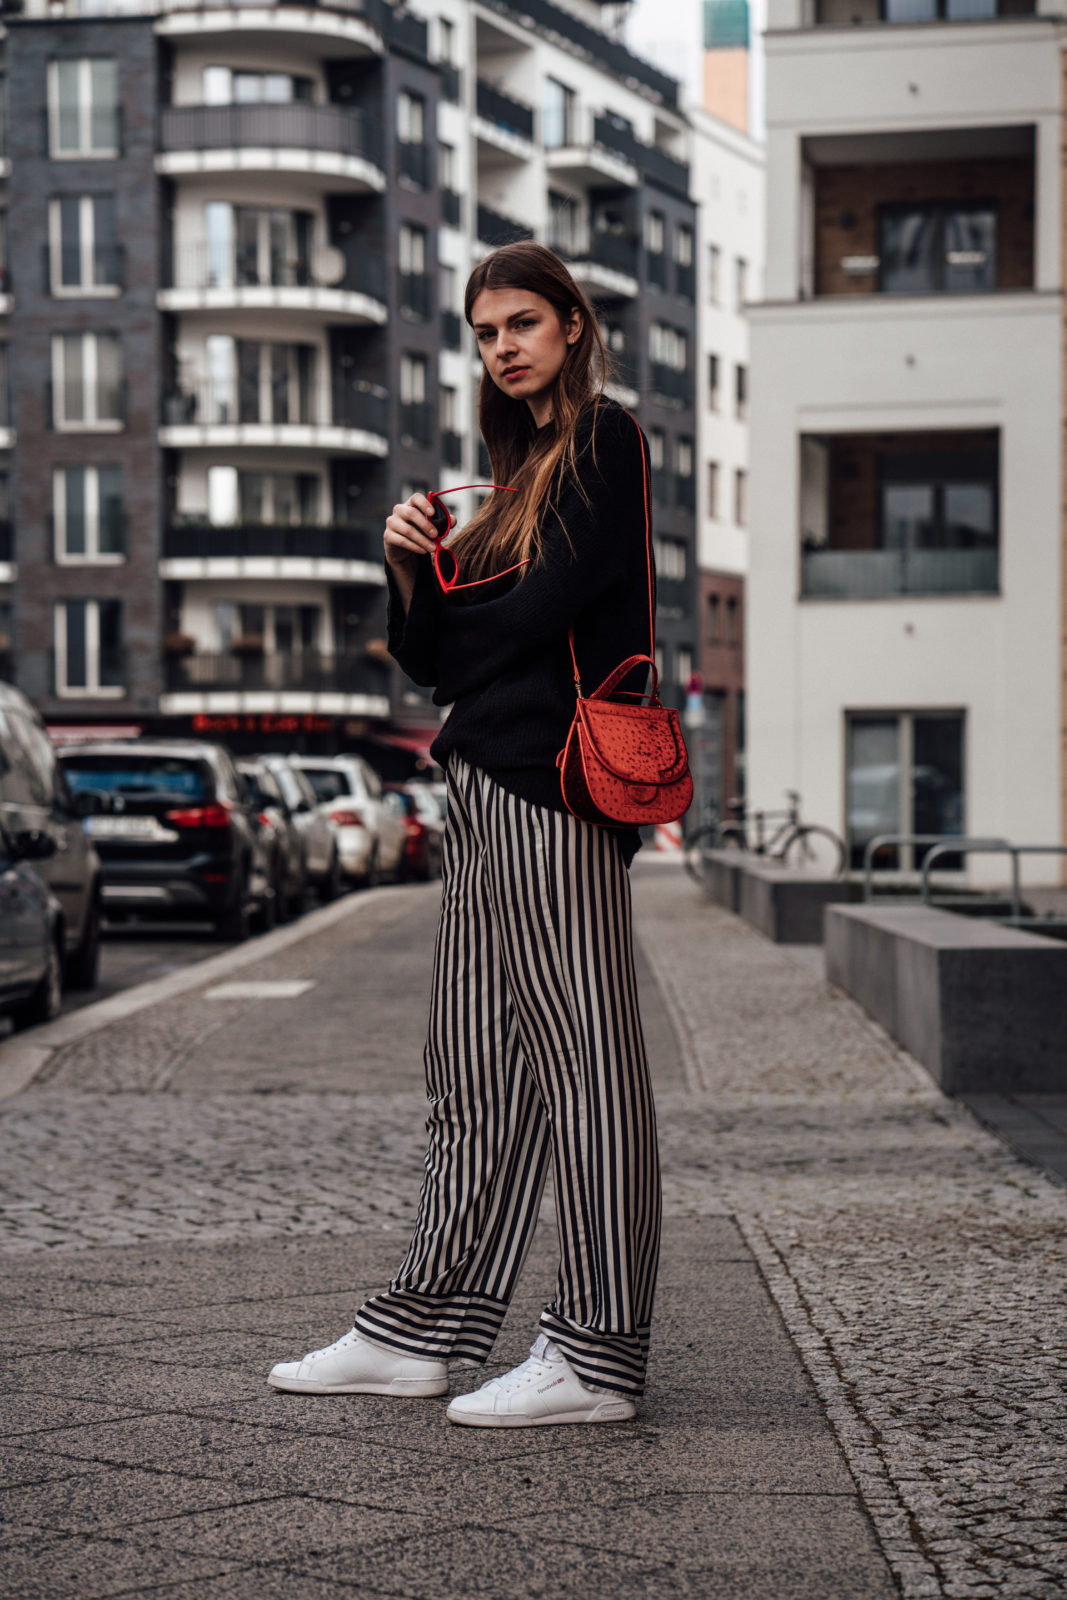 How to style: wearing striped pants this season || spring outfit